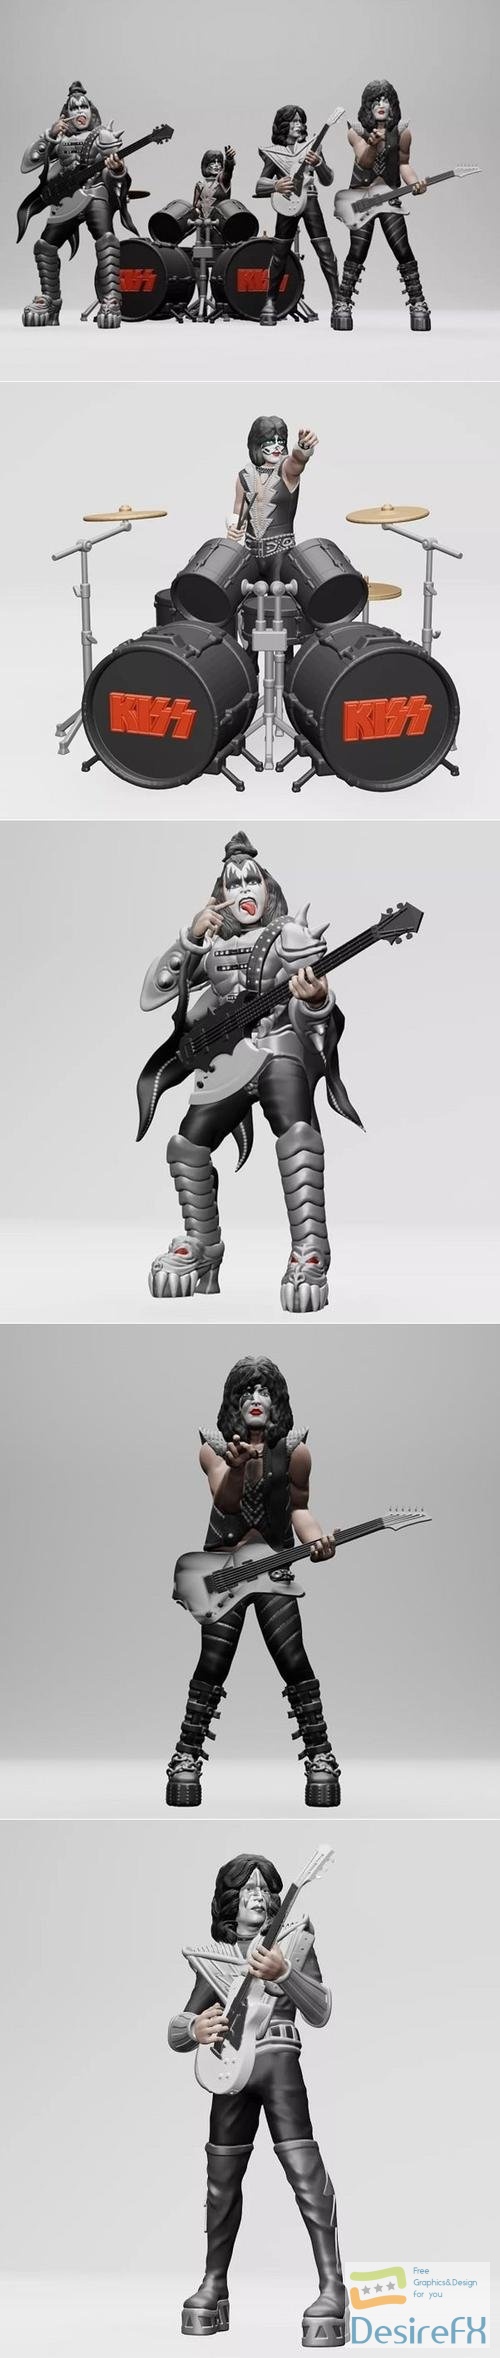 Kiss Music Complet – 3D Print